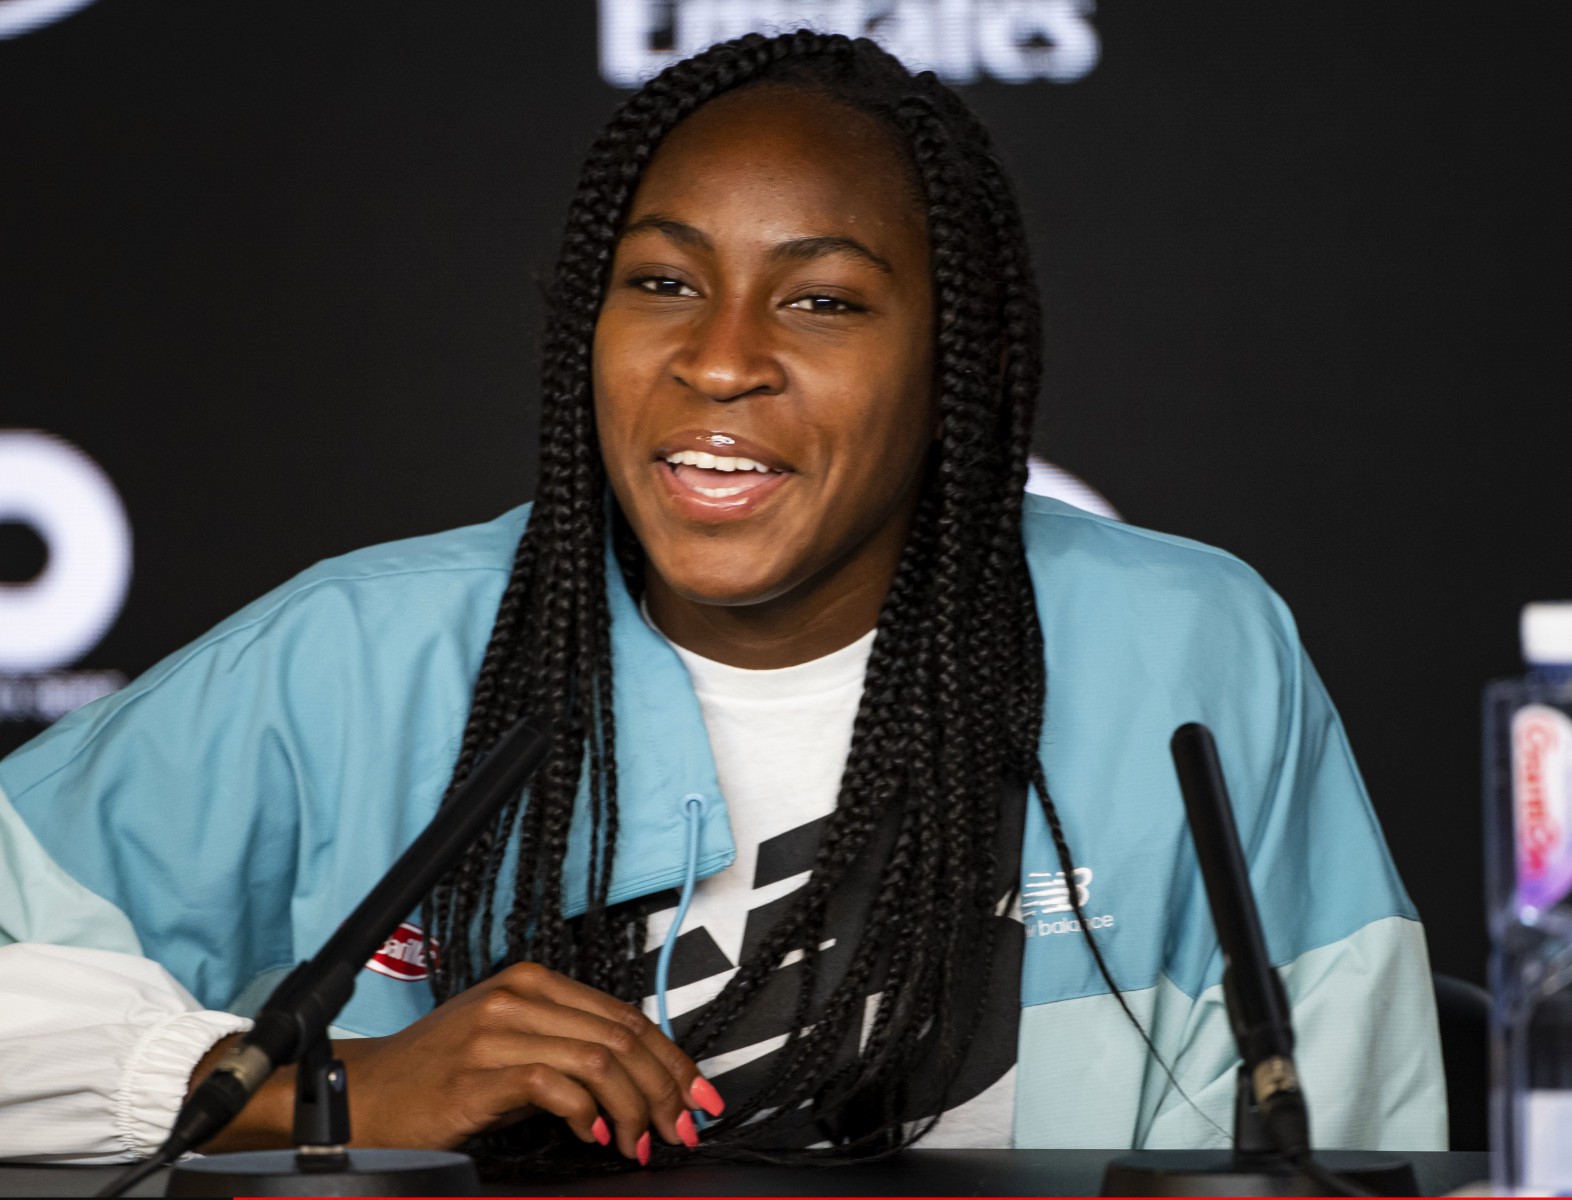 , Coco Gauff, 15, reckons driving a car is scarier than facing worlds top tennis stars ahead of Naomi Osaka clash